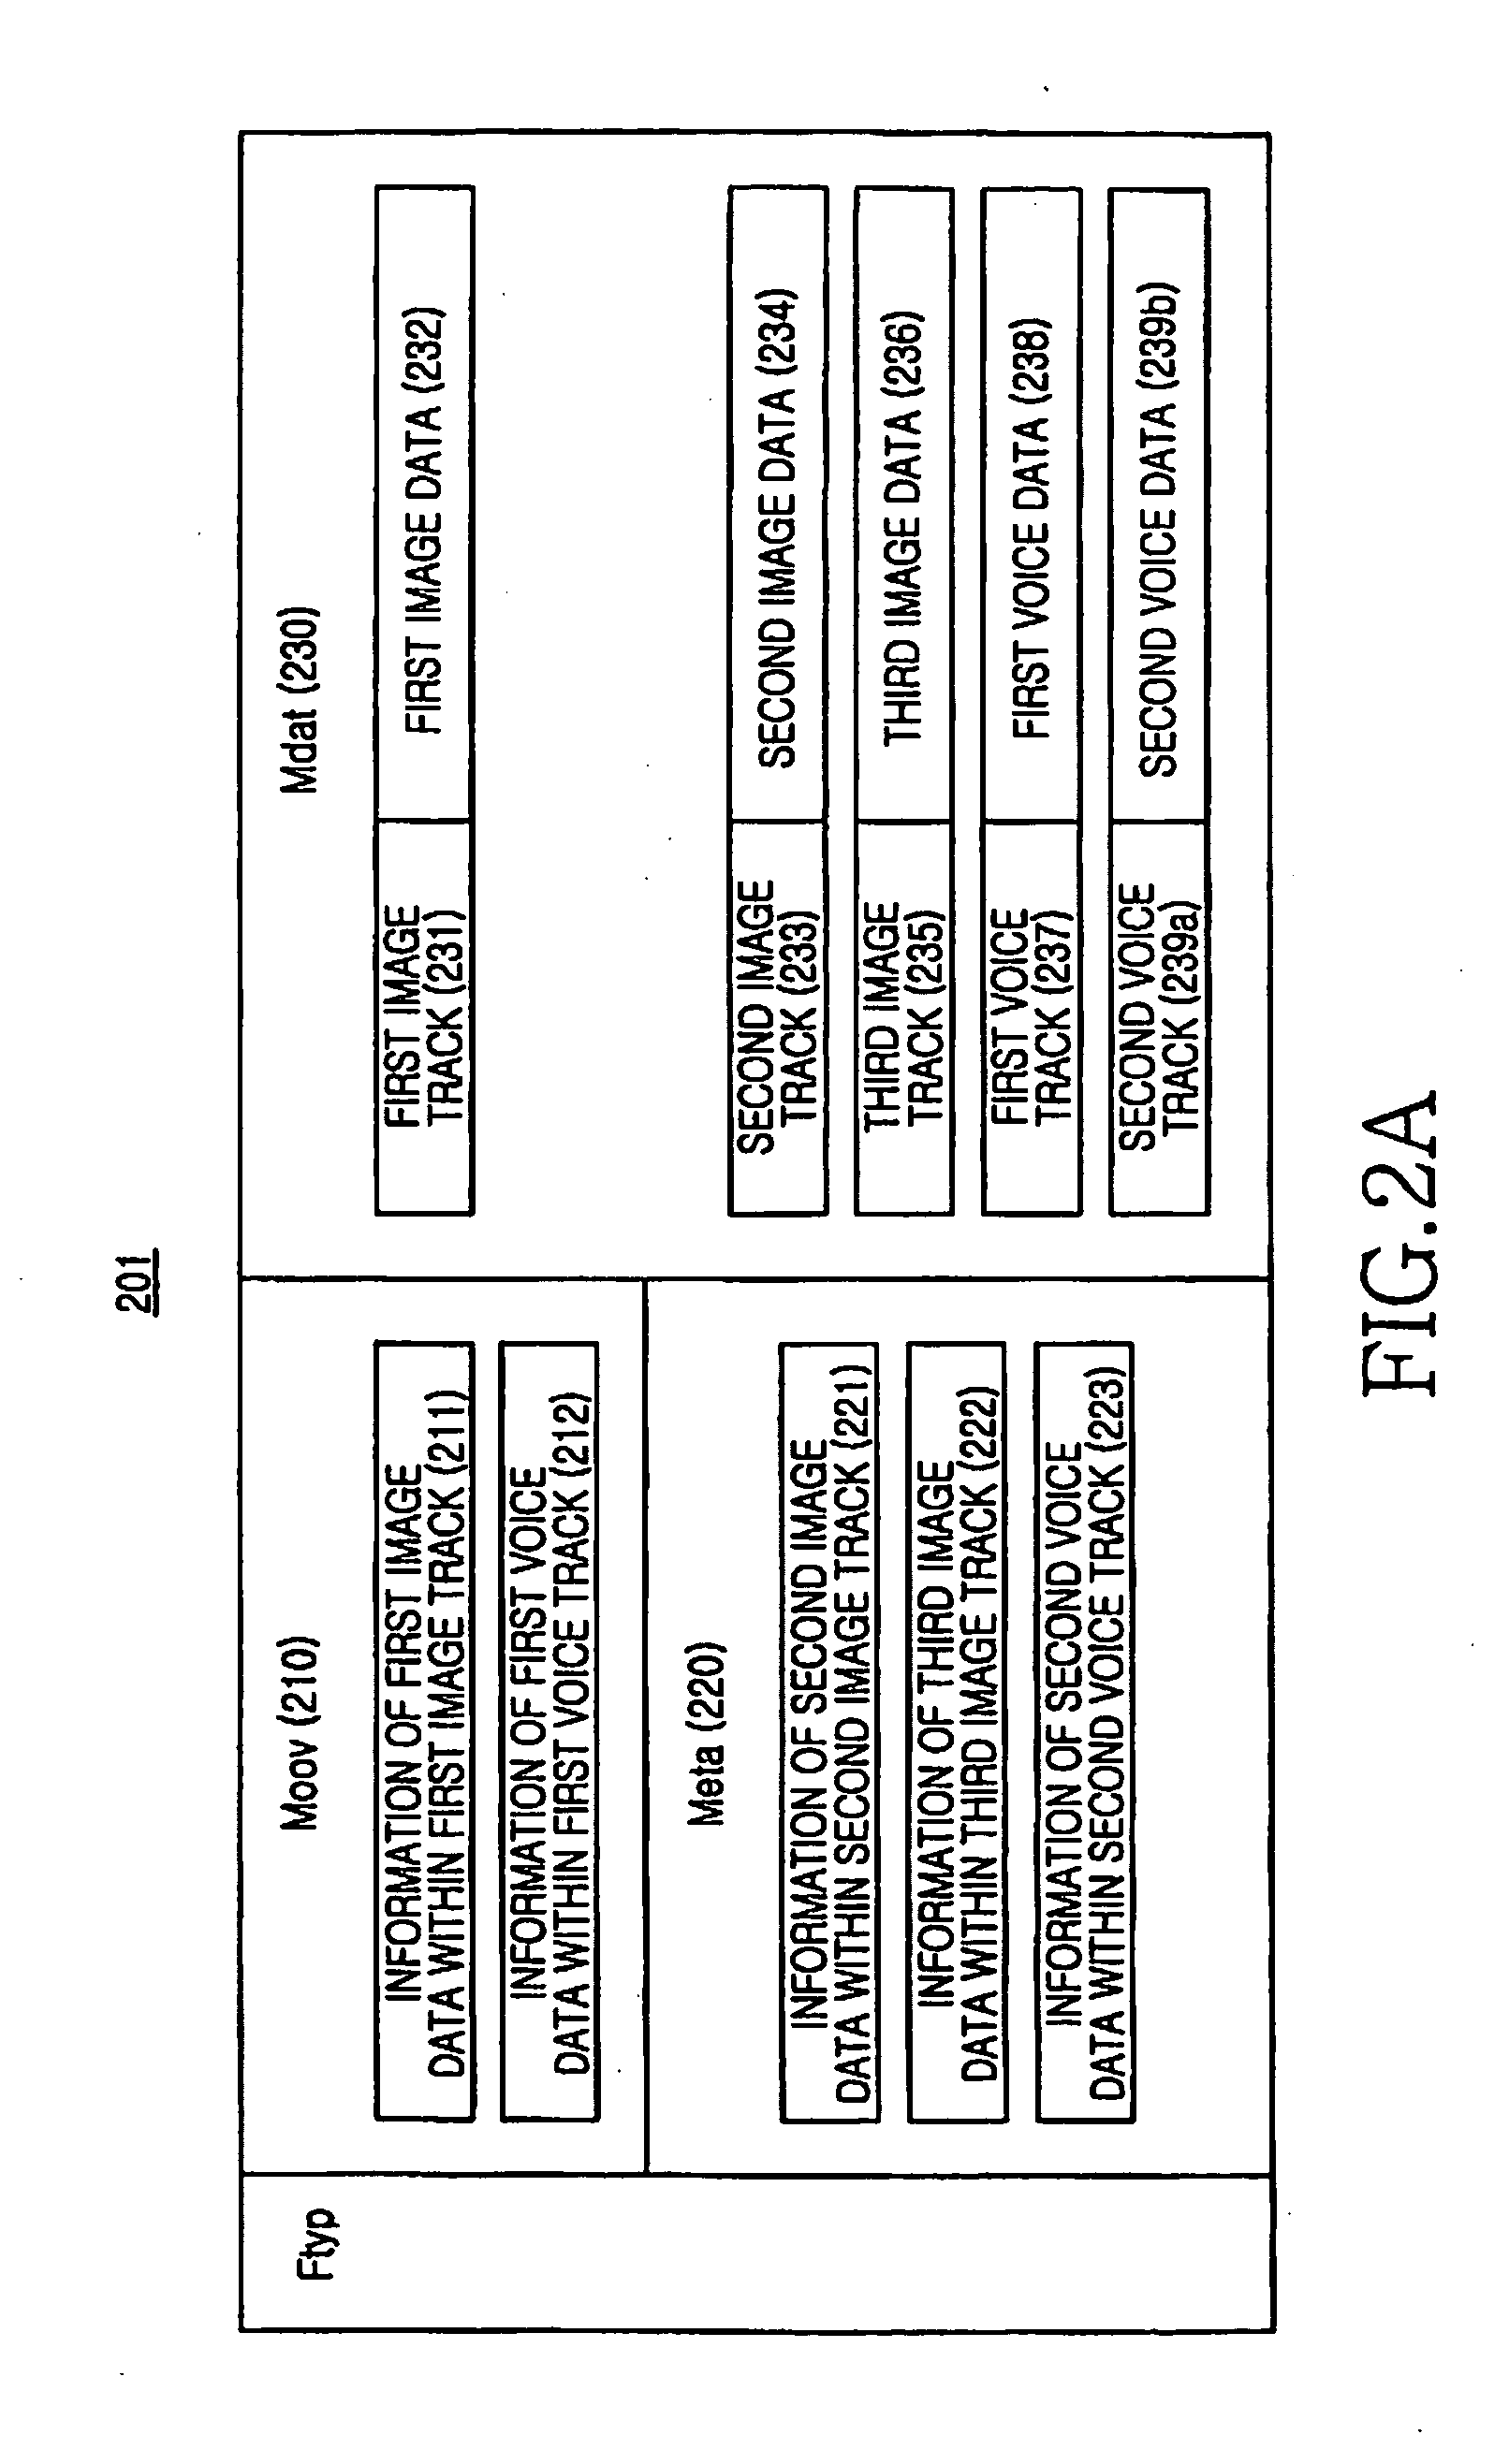 System and method for generating and reproducing 3D stereoscopic image file including 2d image